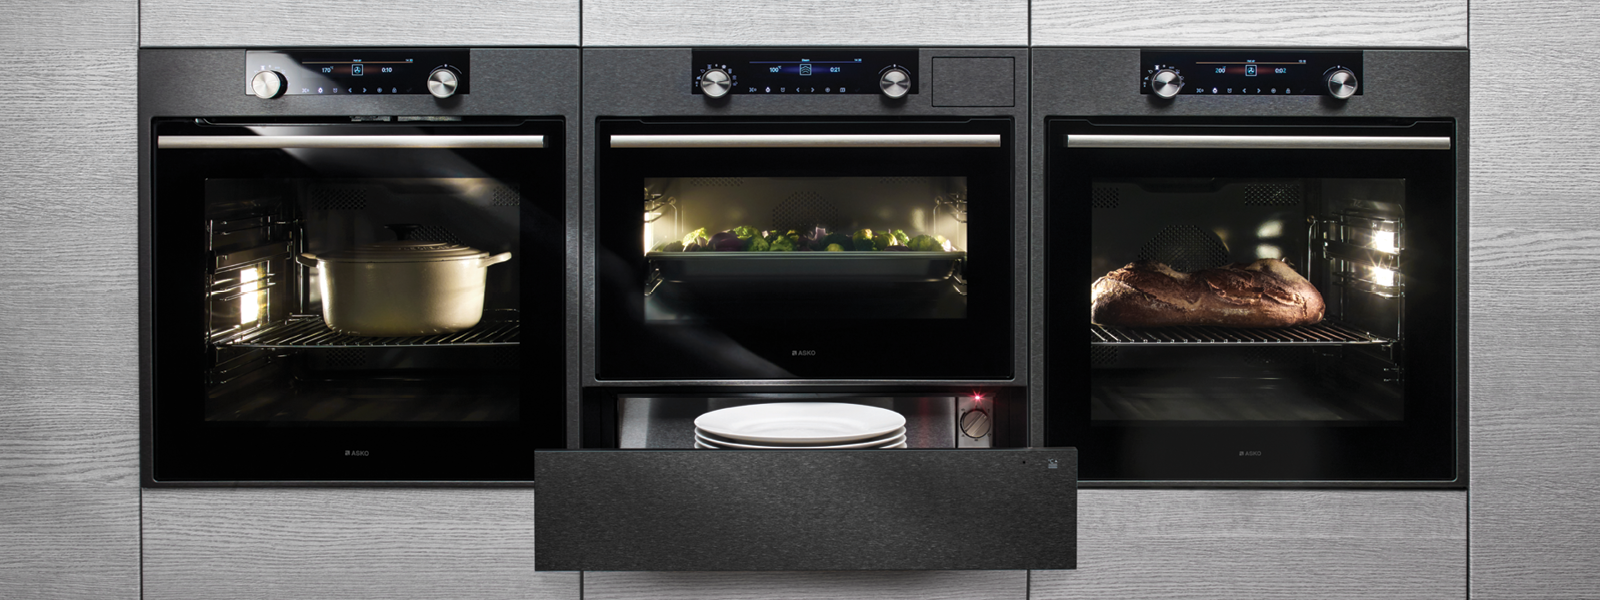 Save up to $400 on selected Asko Pyrolytic Ovens at Hart & Co